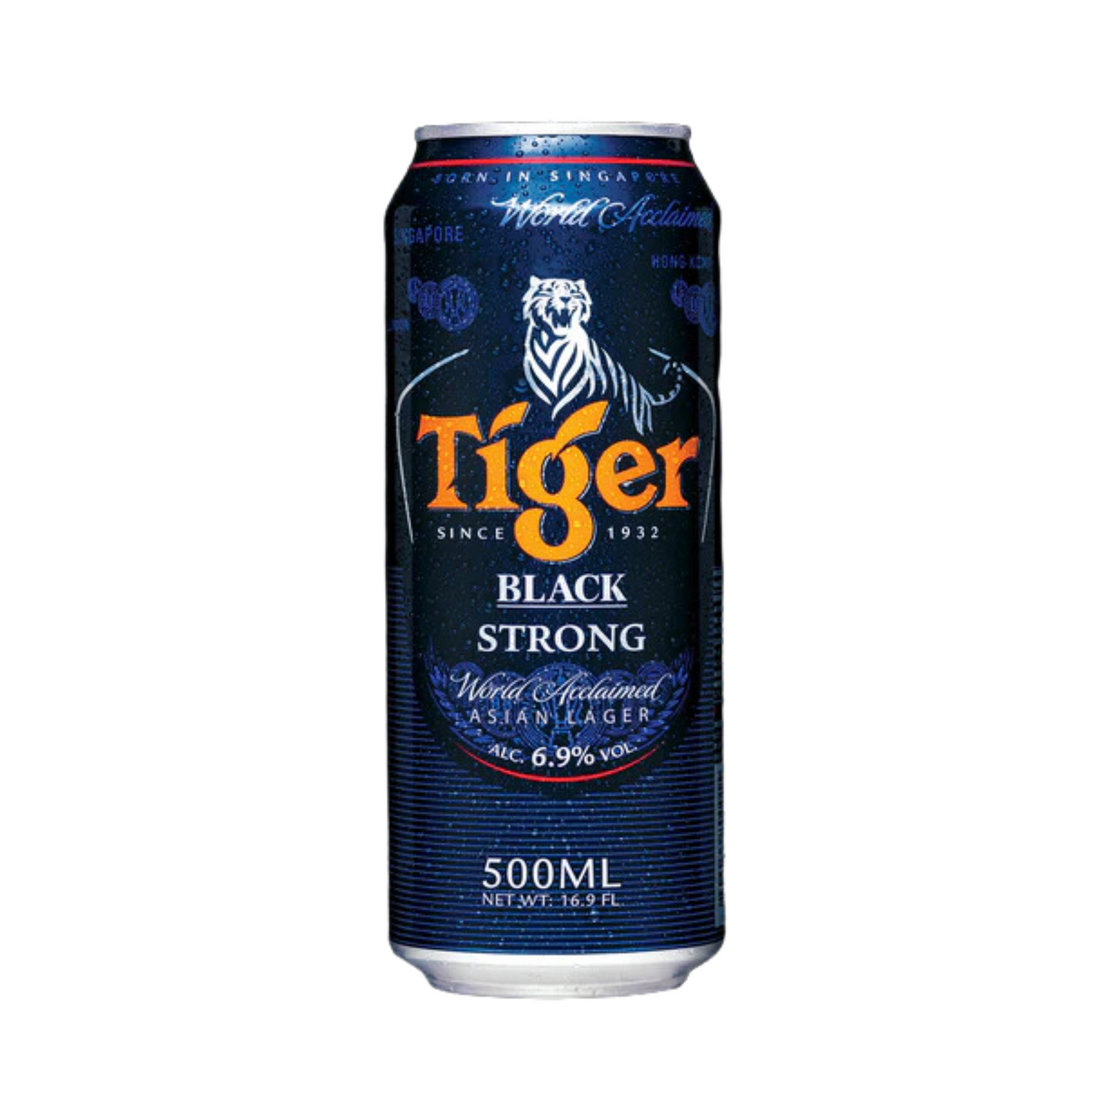 Tiger Black Strong, 500ml x 24 Cans